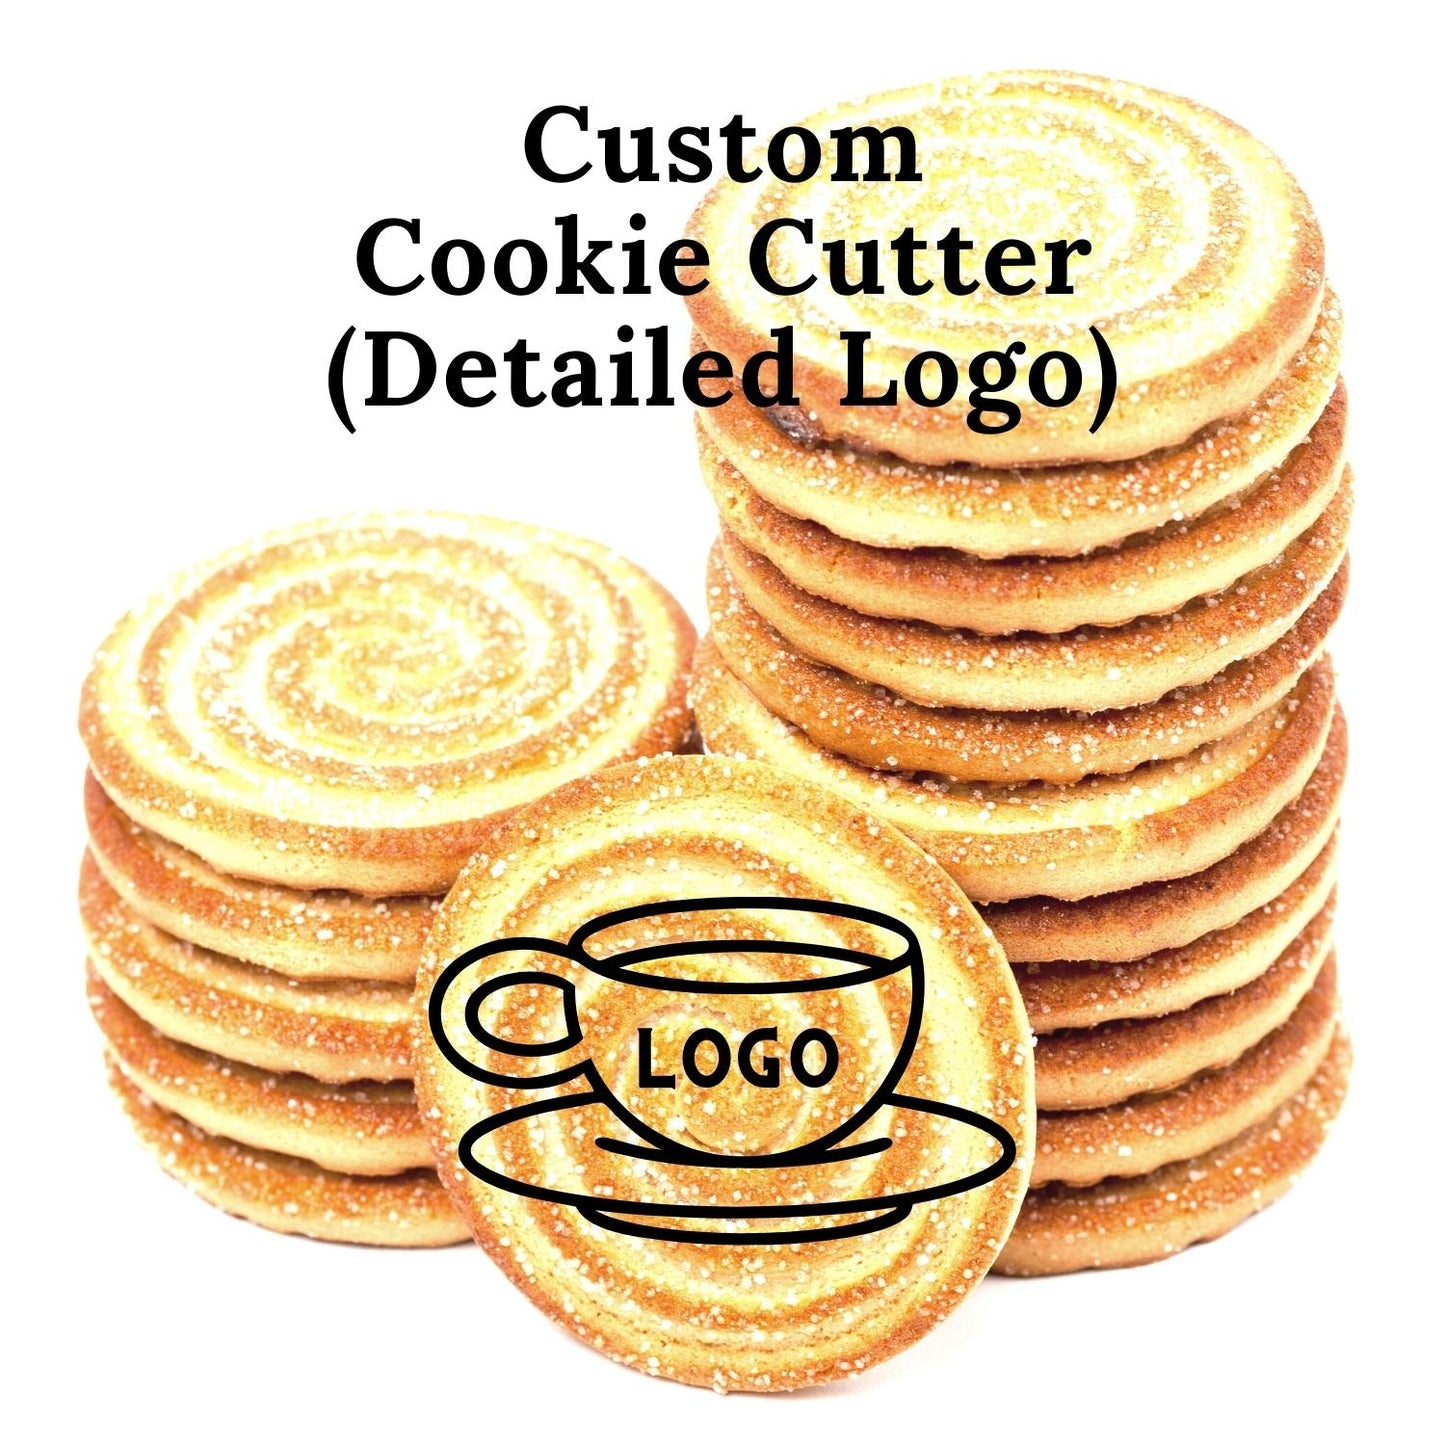 Custom Designed Cookie Cutter - Detailed Logo or Face Made in USA PR3891